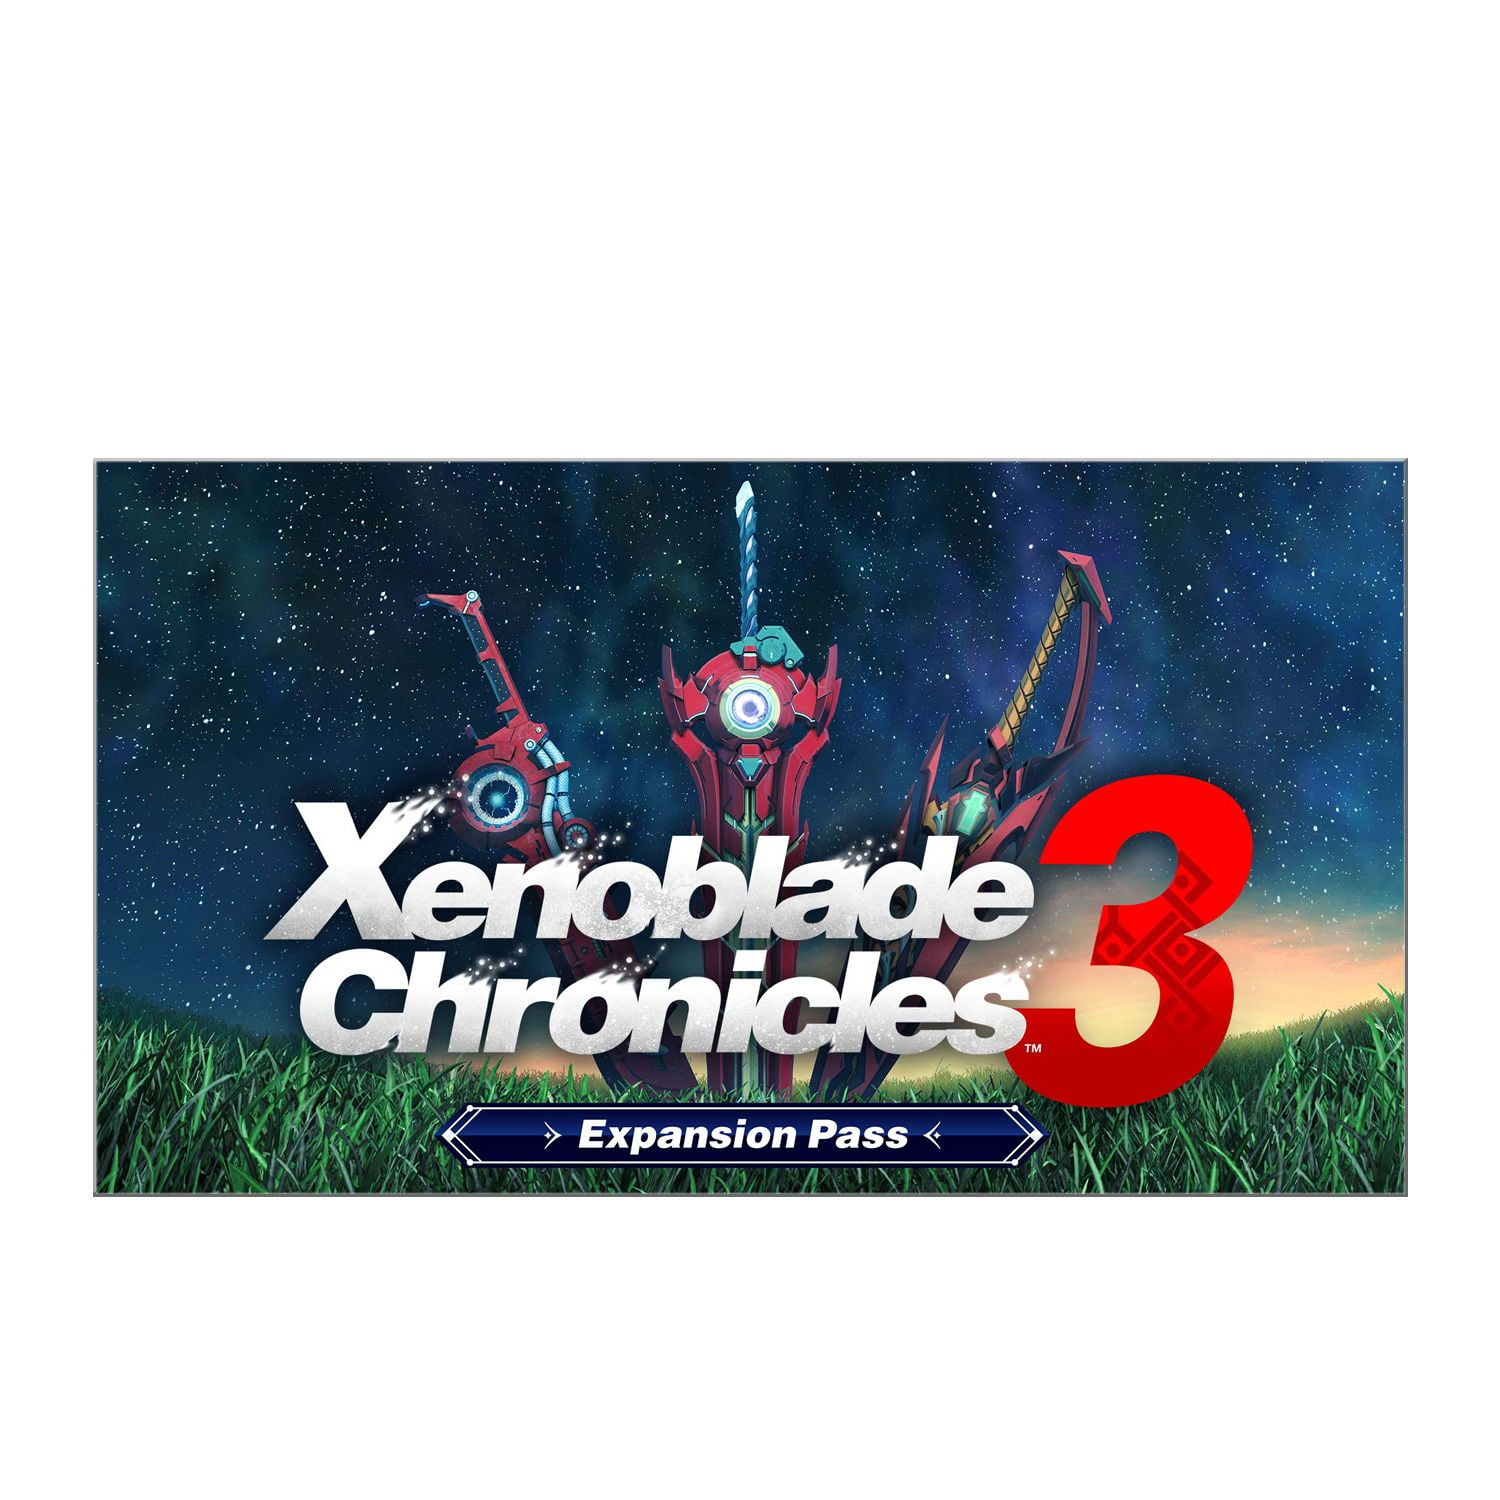 Xenoblade Chronicles™ 3 Expansion Pass